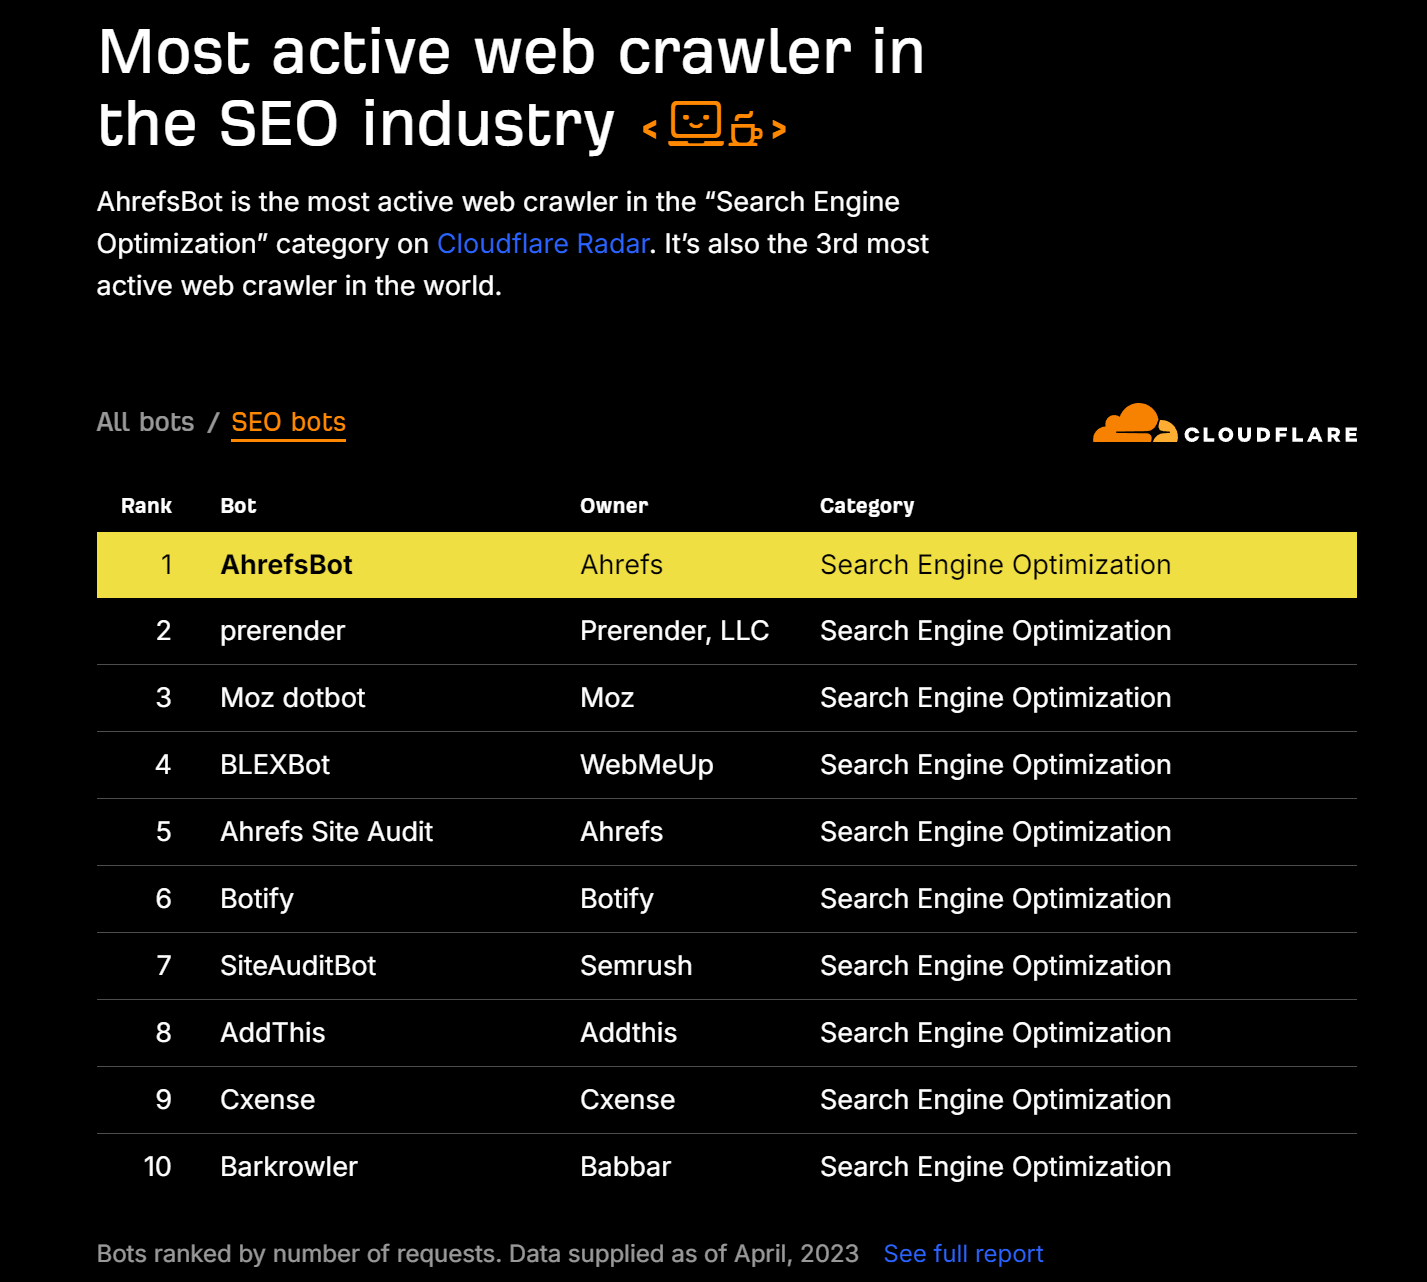 The Ahrefs comparison page includes data from Cloudflare showing how it's the most active web crawler in SEO